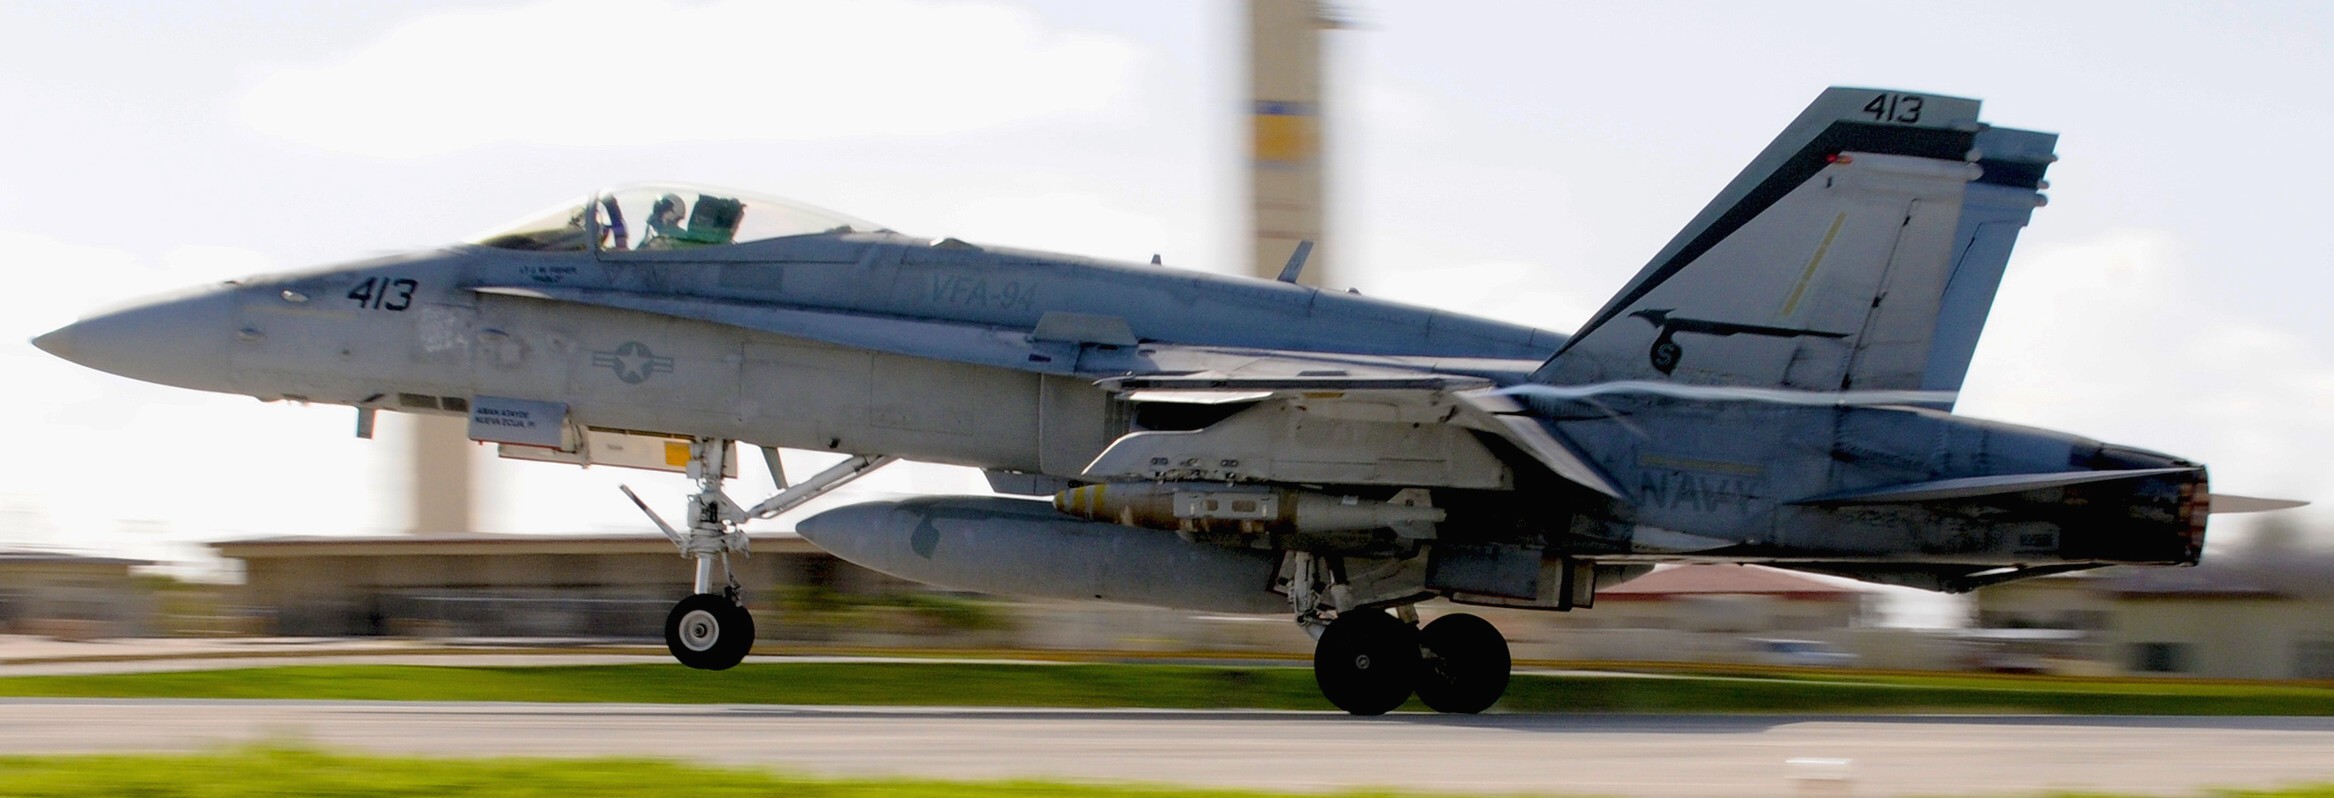 vfa-94 mighty shrikes strike fighter squadron f/a-18c hornet andersen afb guam 08